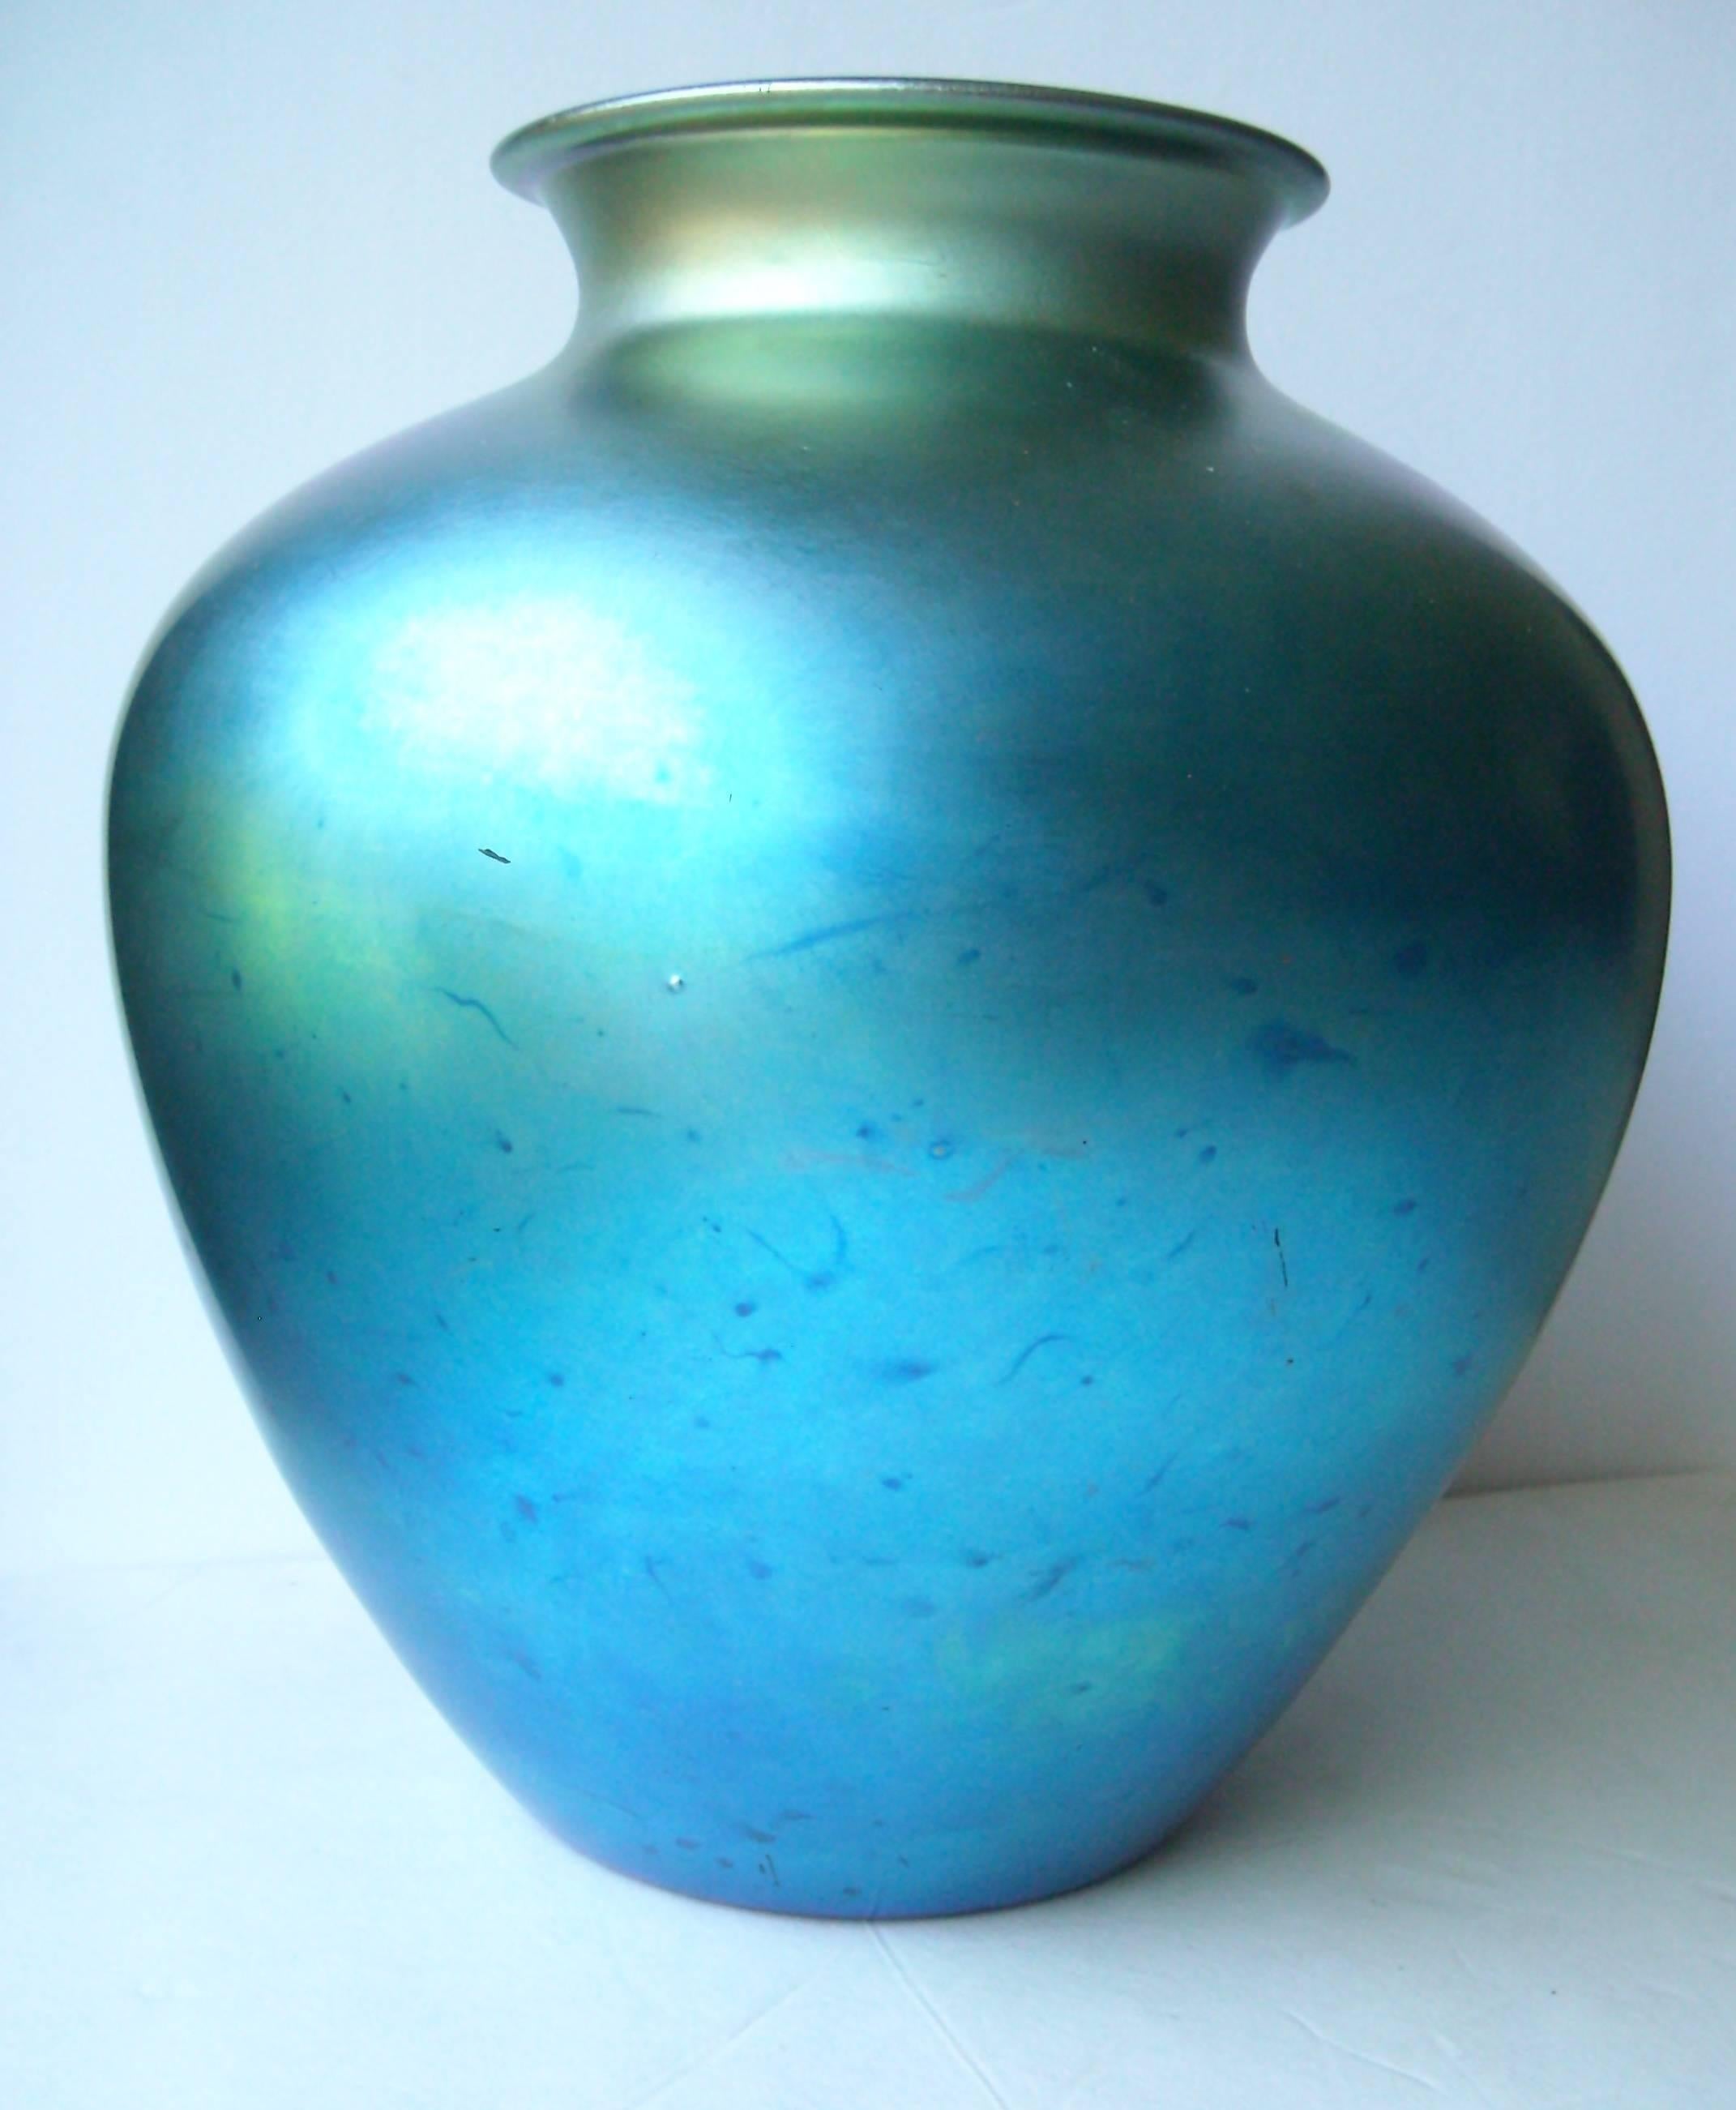 This is a very well-known piece for Steuben, it was many years in production in many different colors, but this is a very large vase. Signed and numbered as shown.